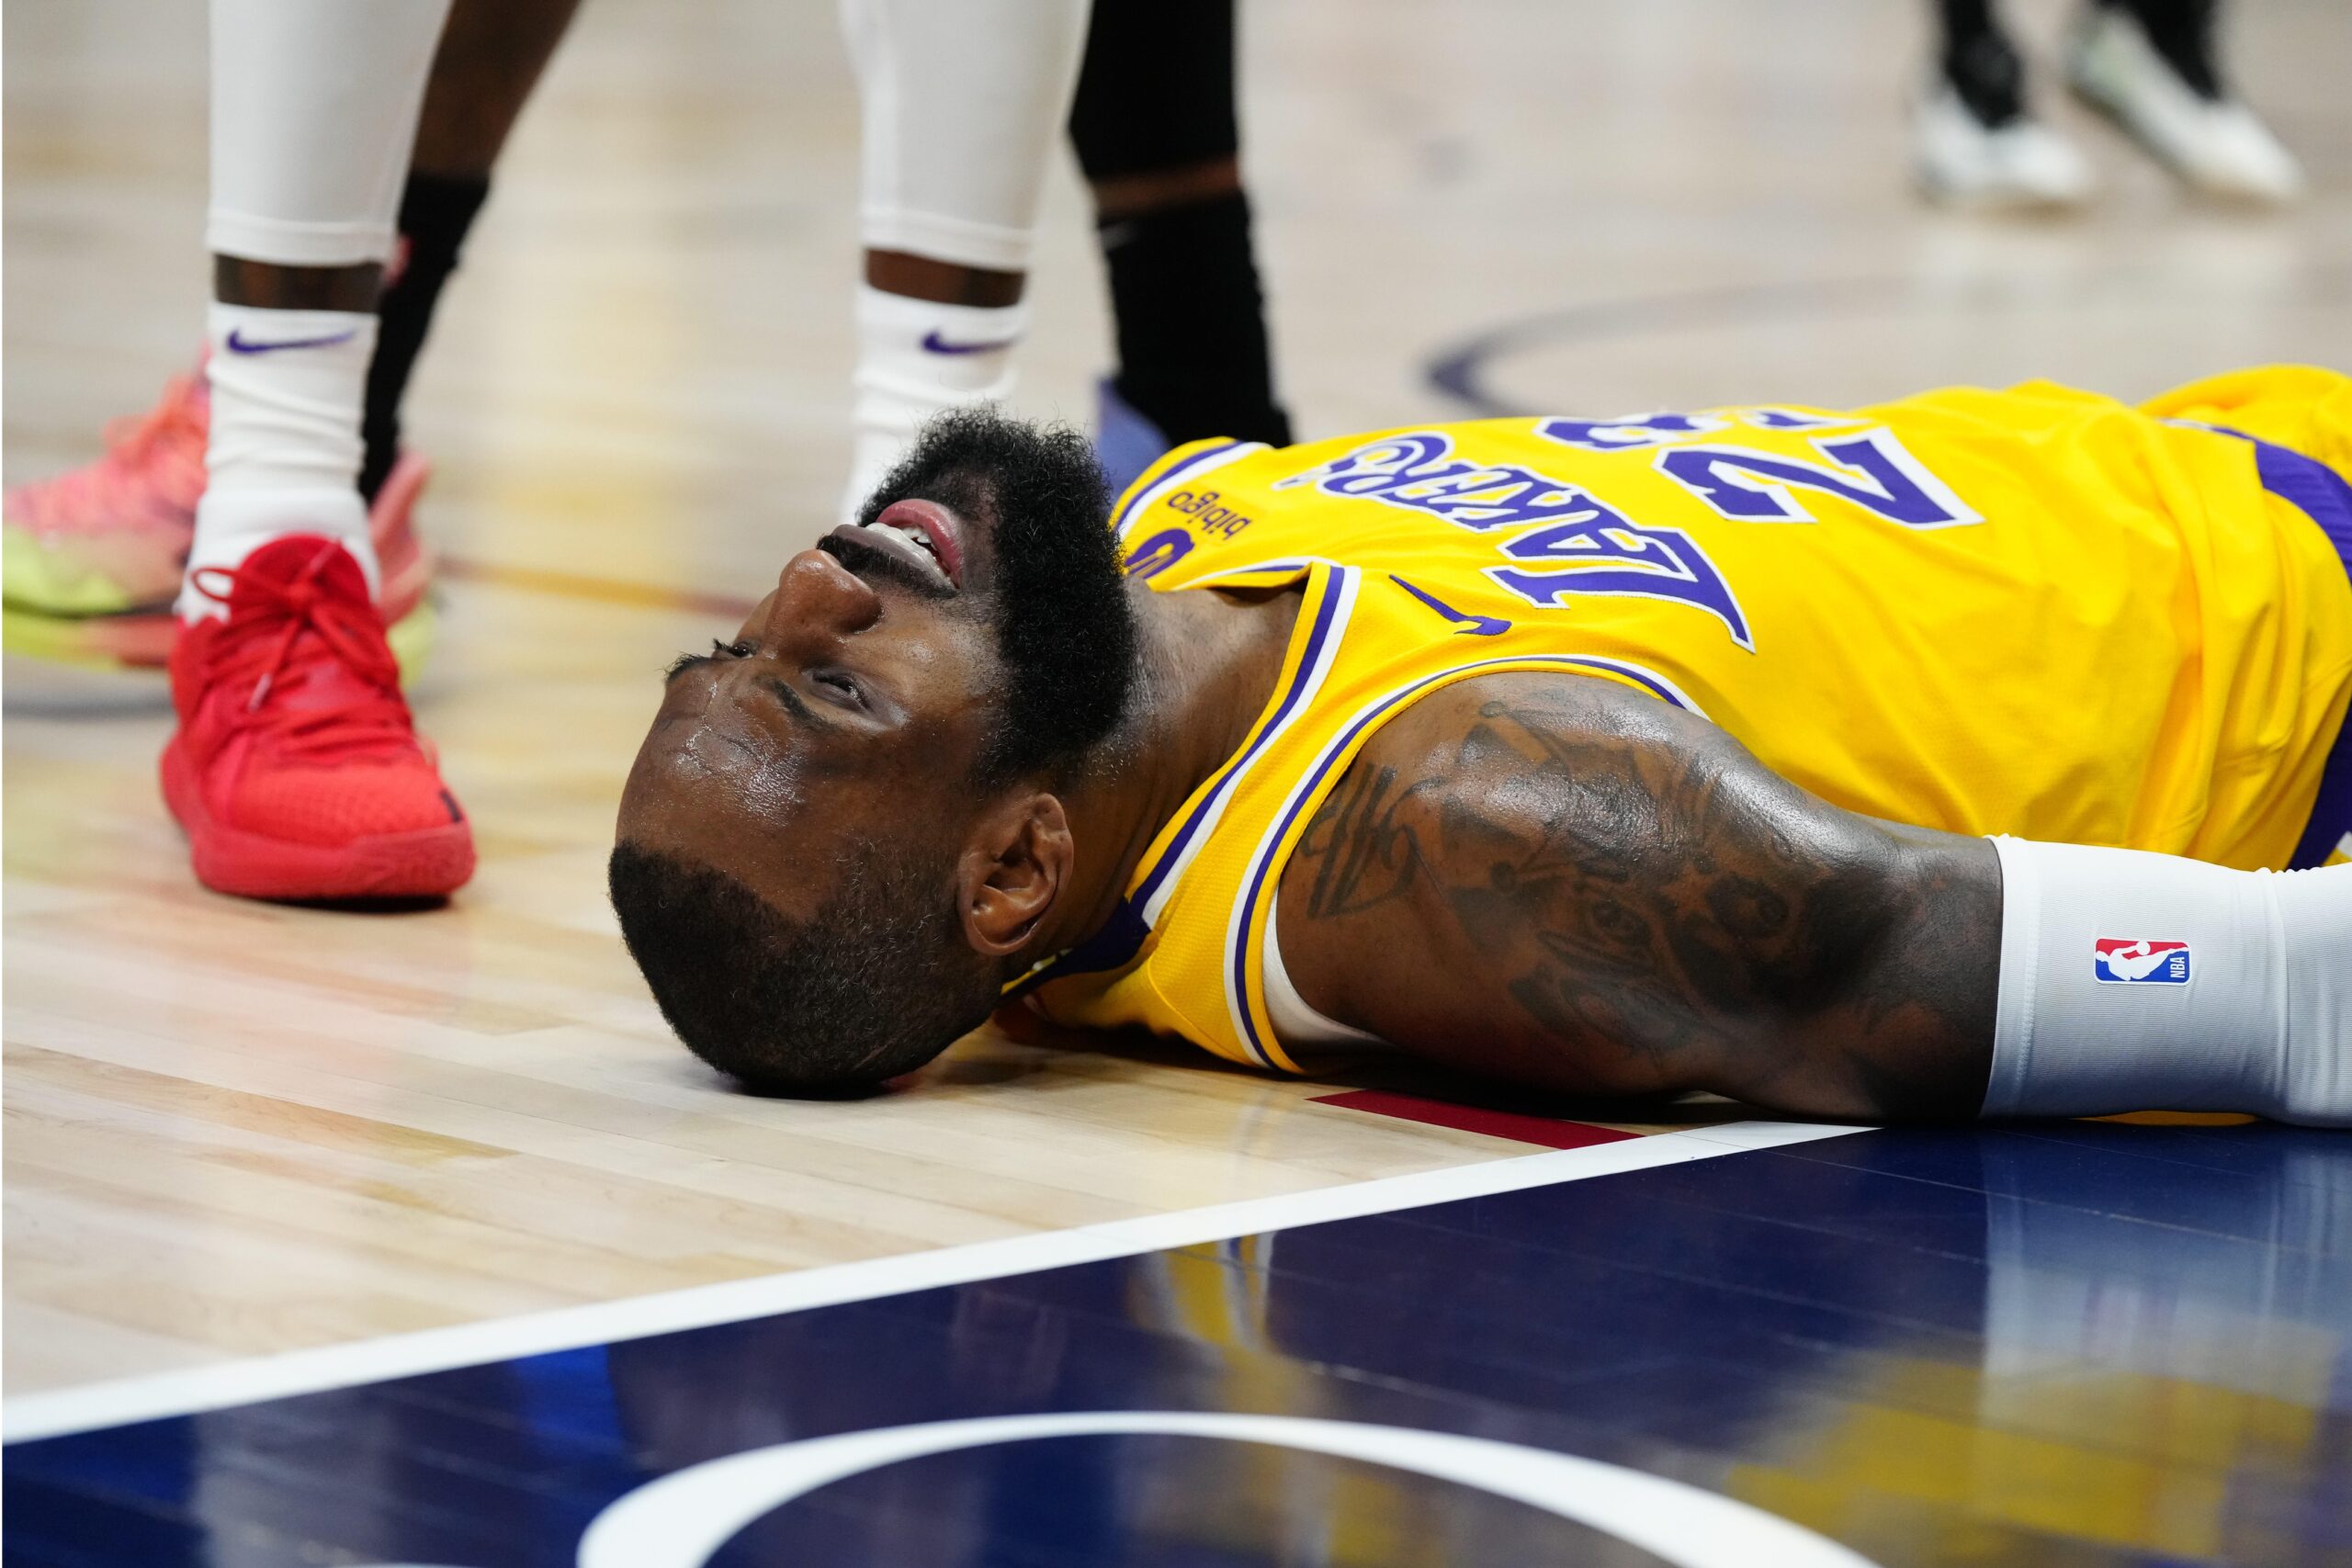 No Matter What, It’s Time for the LeBron-Lakers Breakup